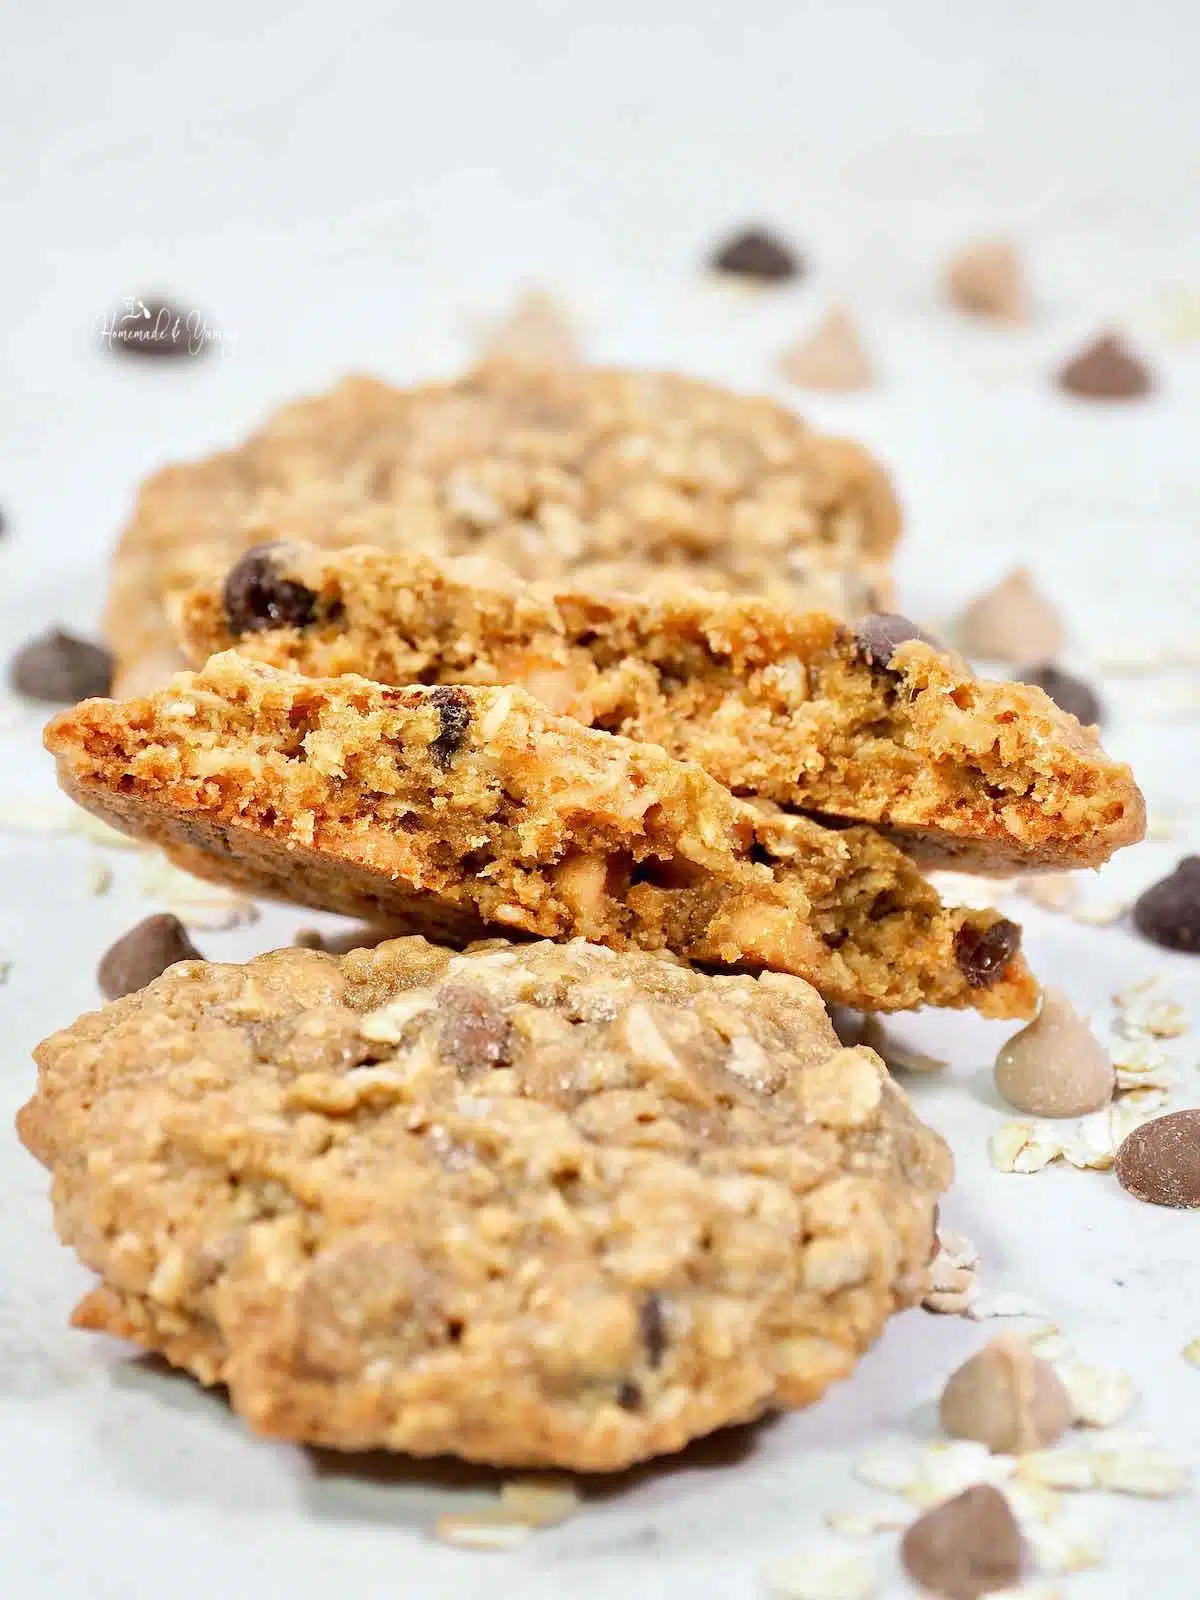 Chewy cookies made with oatmeal and chocolate chips.